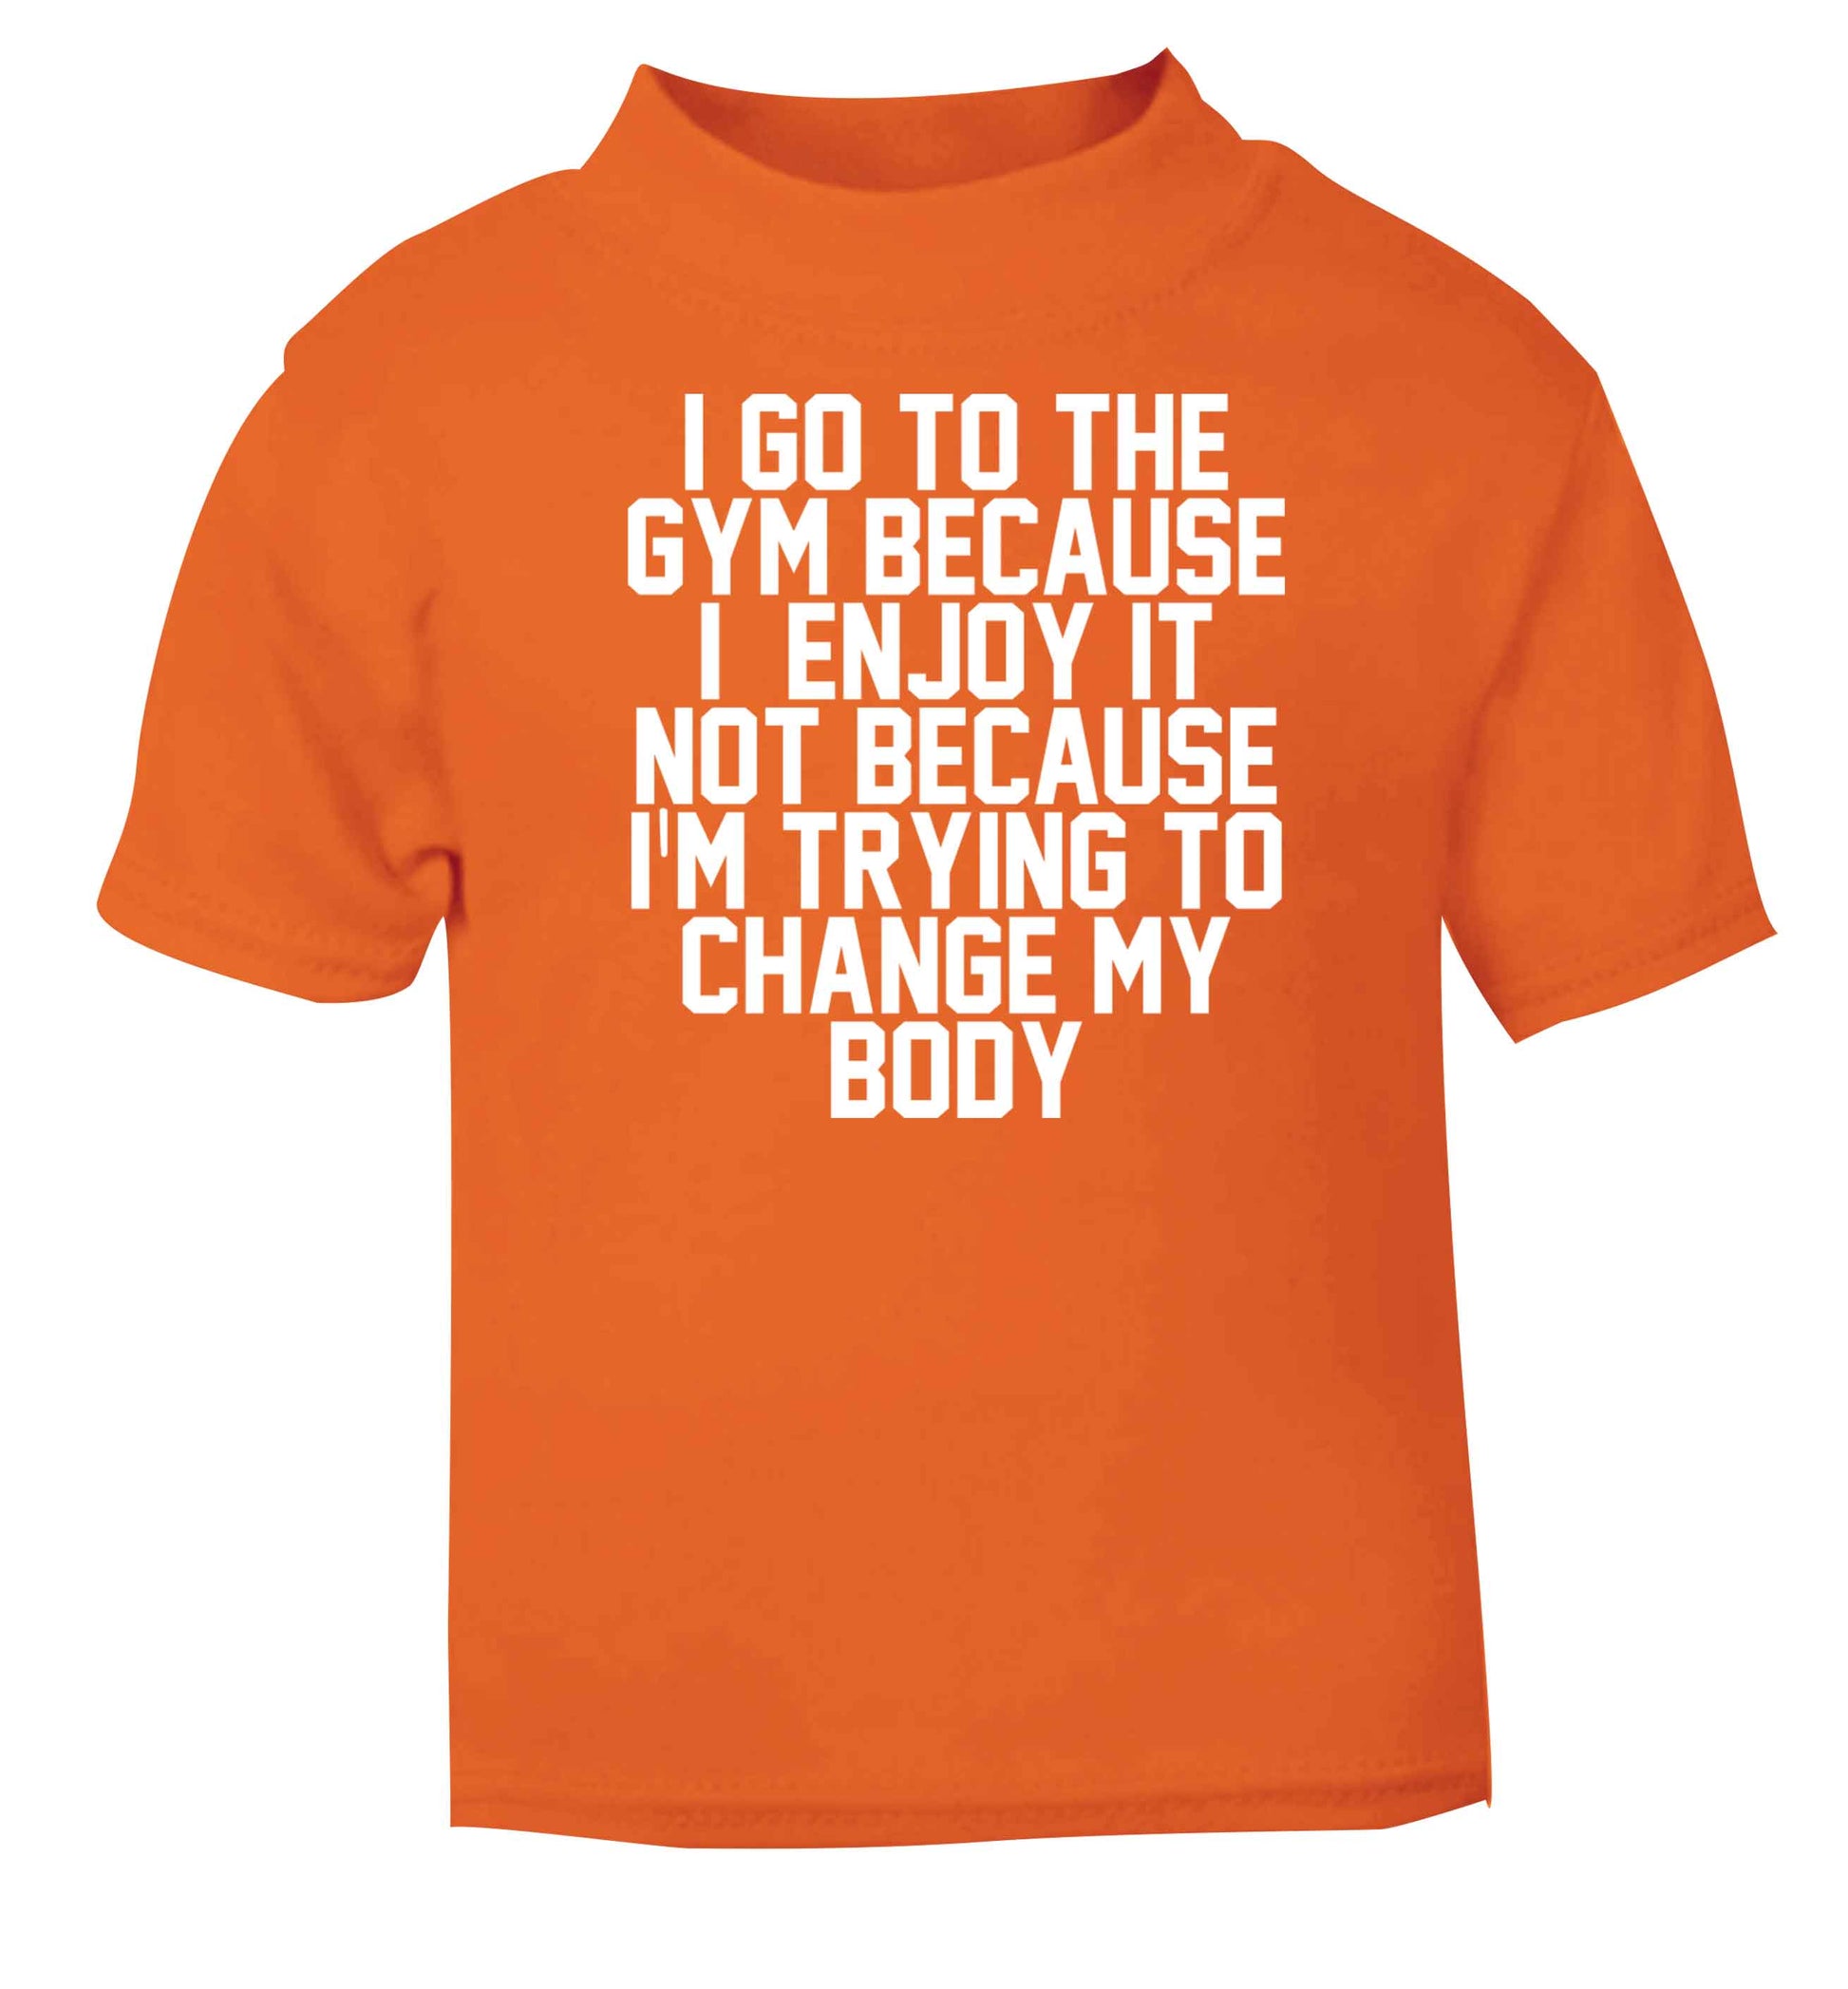 I go to the gym because I enjoy it not because I'm trying to change my body orange baby toddler Tshirt 2 Years